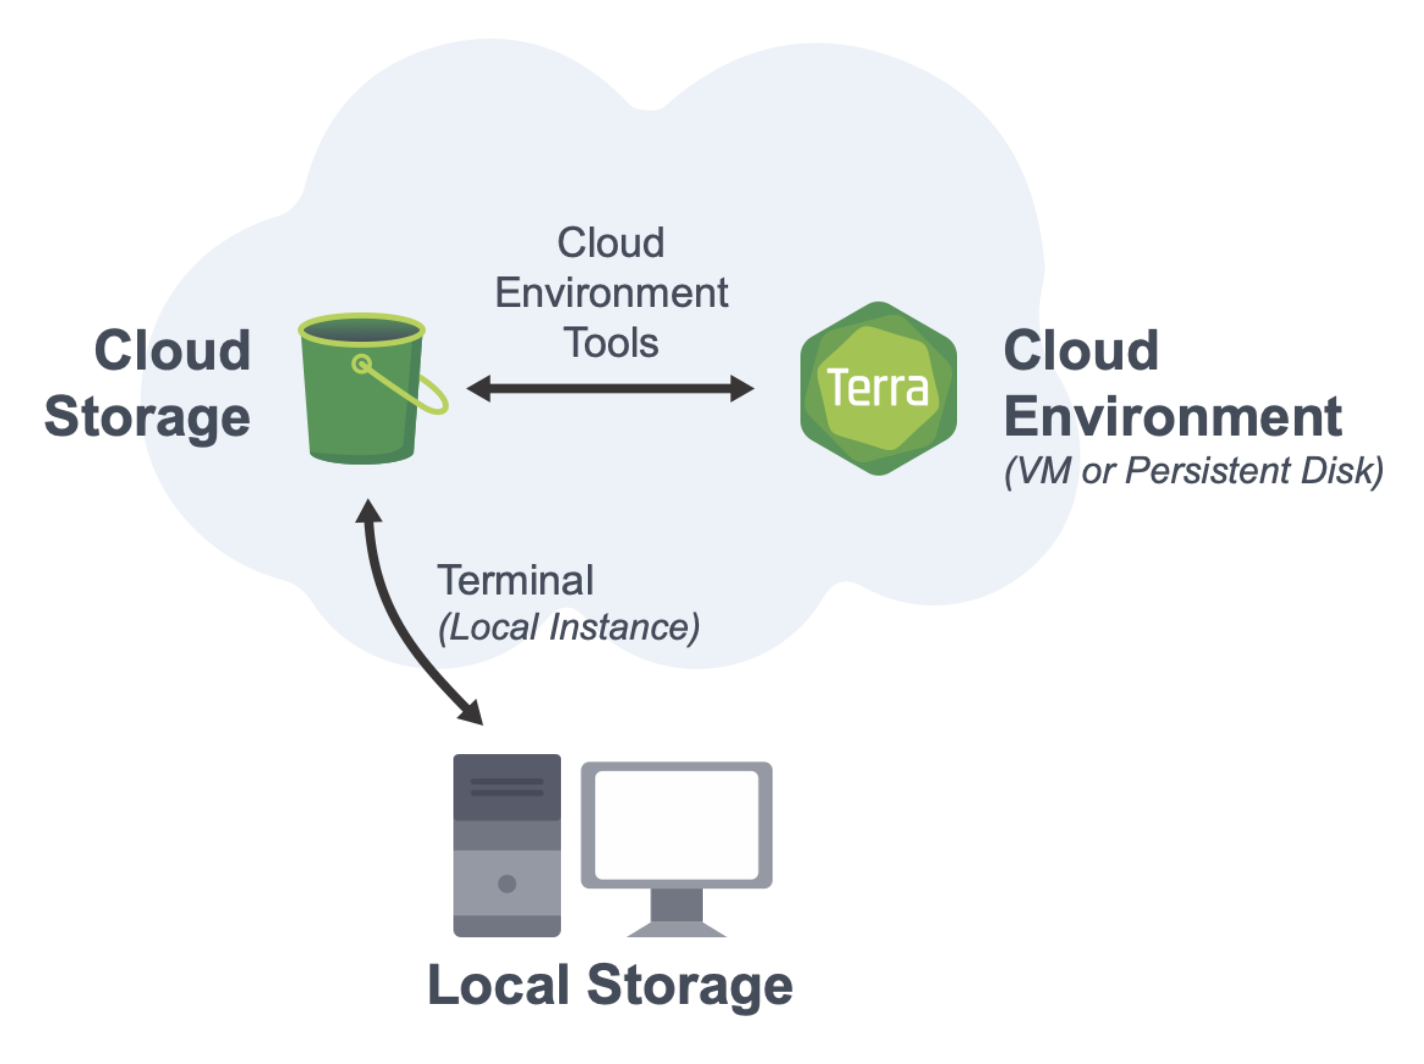 Diagram illustrating the relationships between local storage, and the cloud environment. A bidirectional arrow connects local storage and cloud storage, and this arrow is labeled 'terminal (local instance)'. Another bidirectional arrow connects cloud storage and the cloud environment, labeled 'cloud environment tools'. 